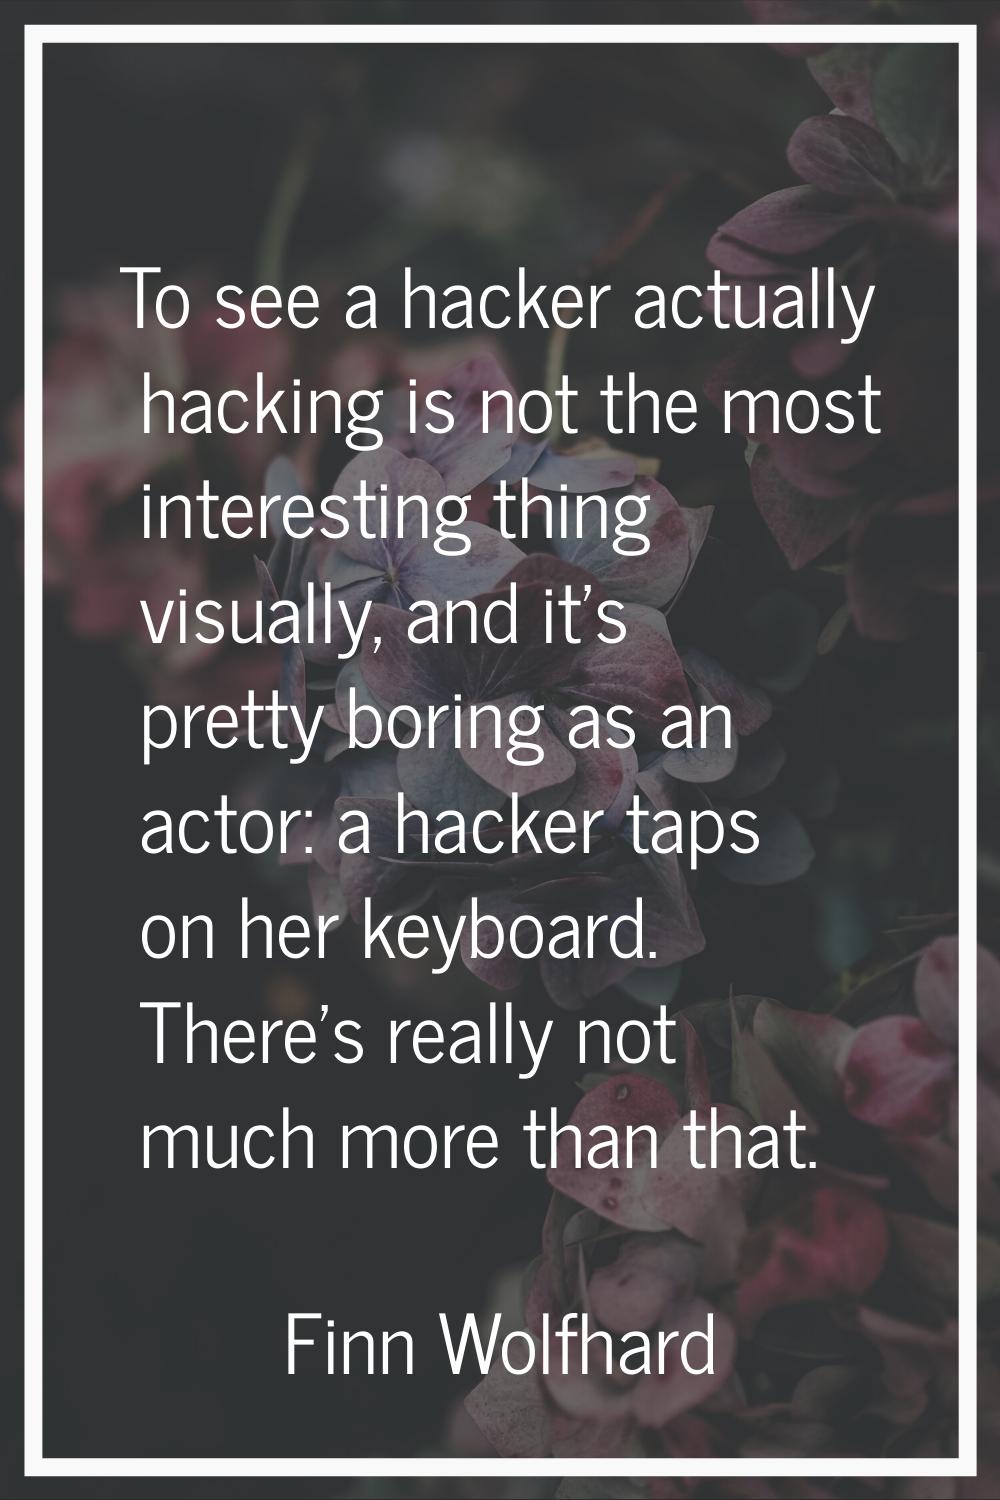 To see a hacker actually hacking is not the most interesting thing visually, and it's pretty boring